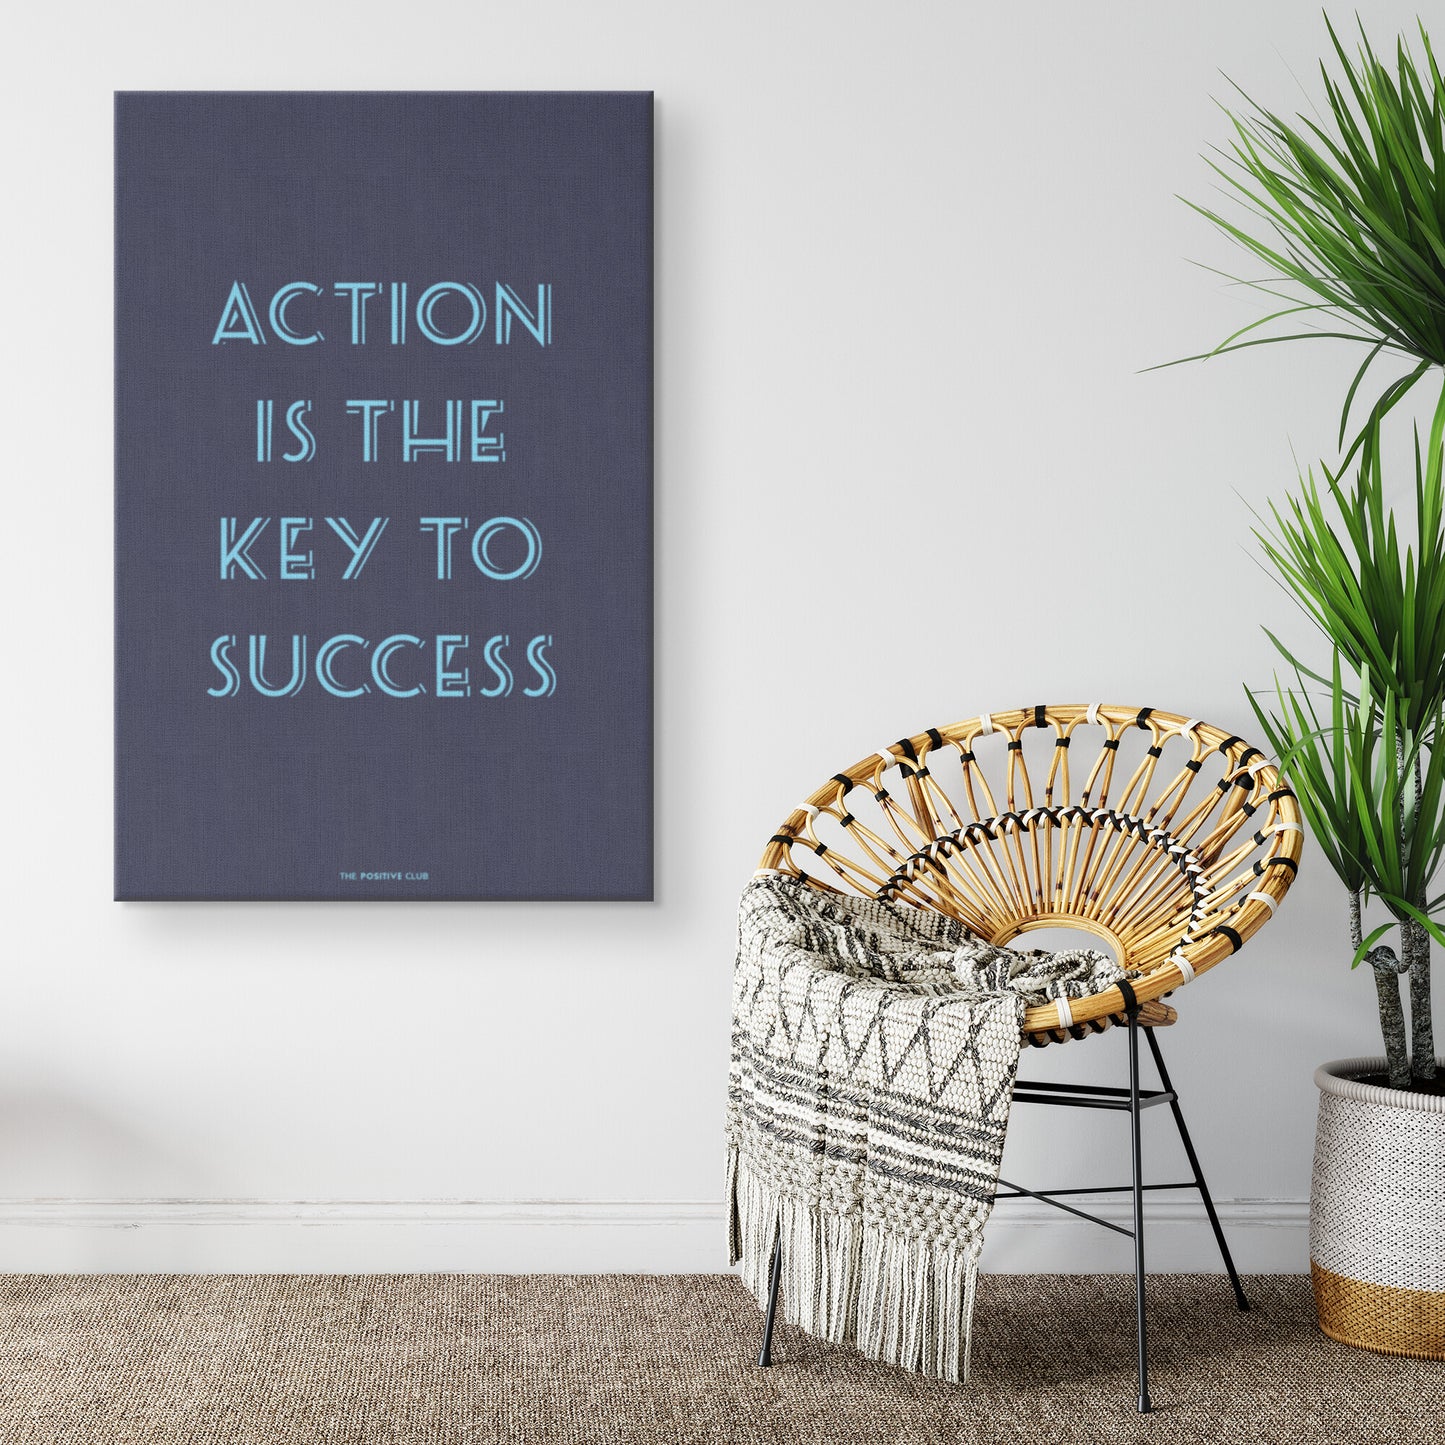 ACTION IS THE KEY TO SUCCESS